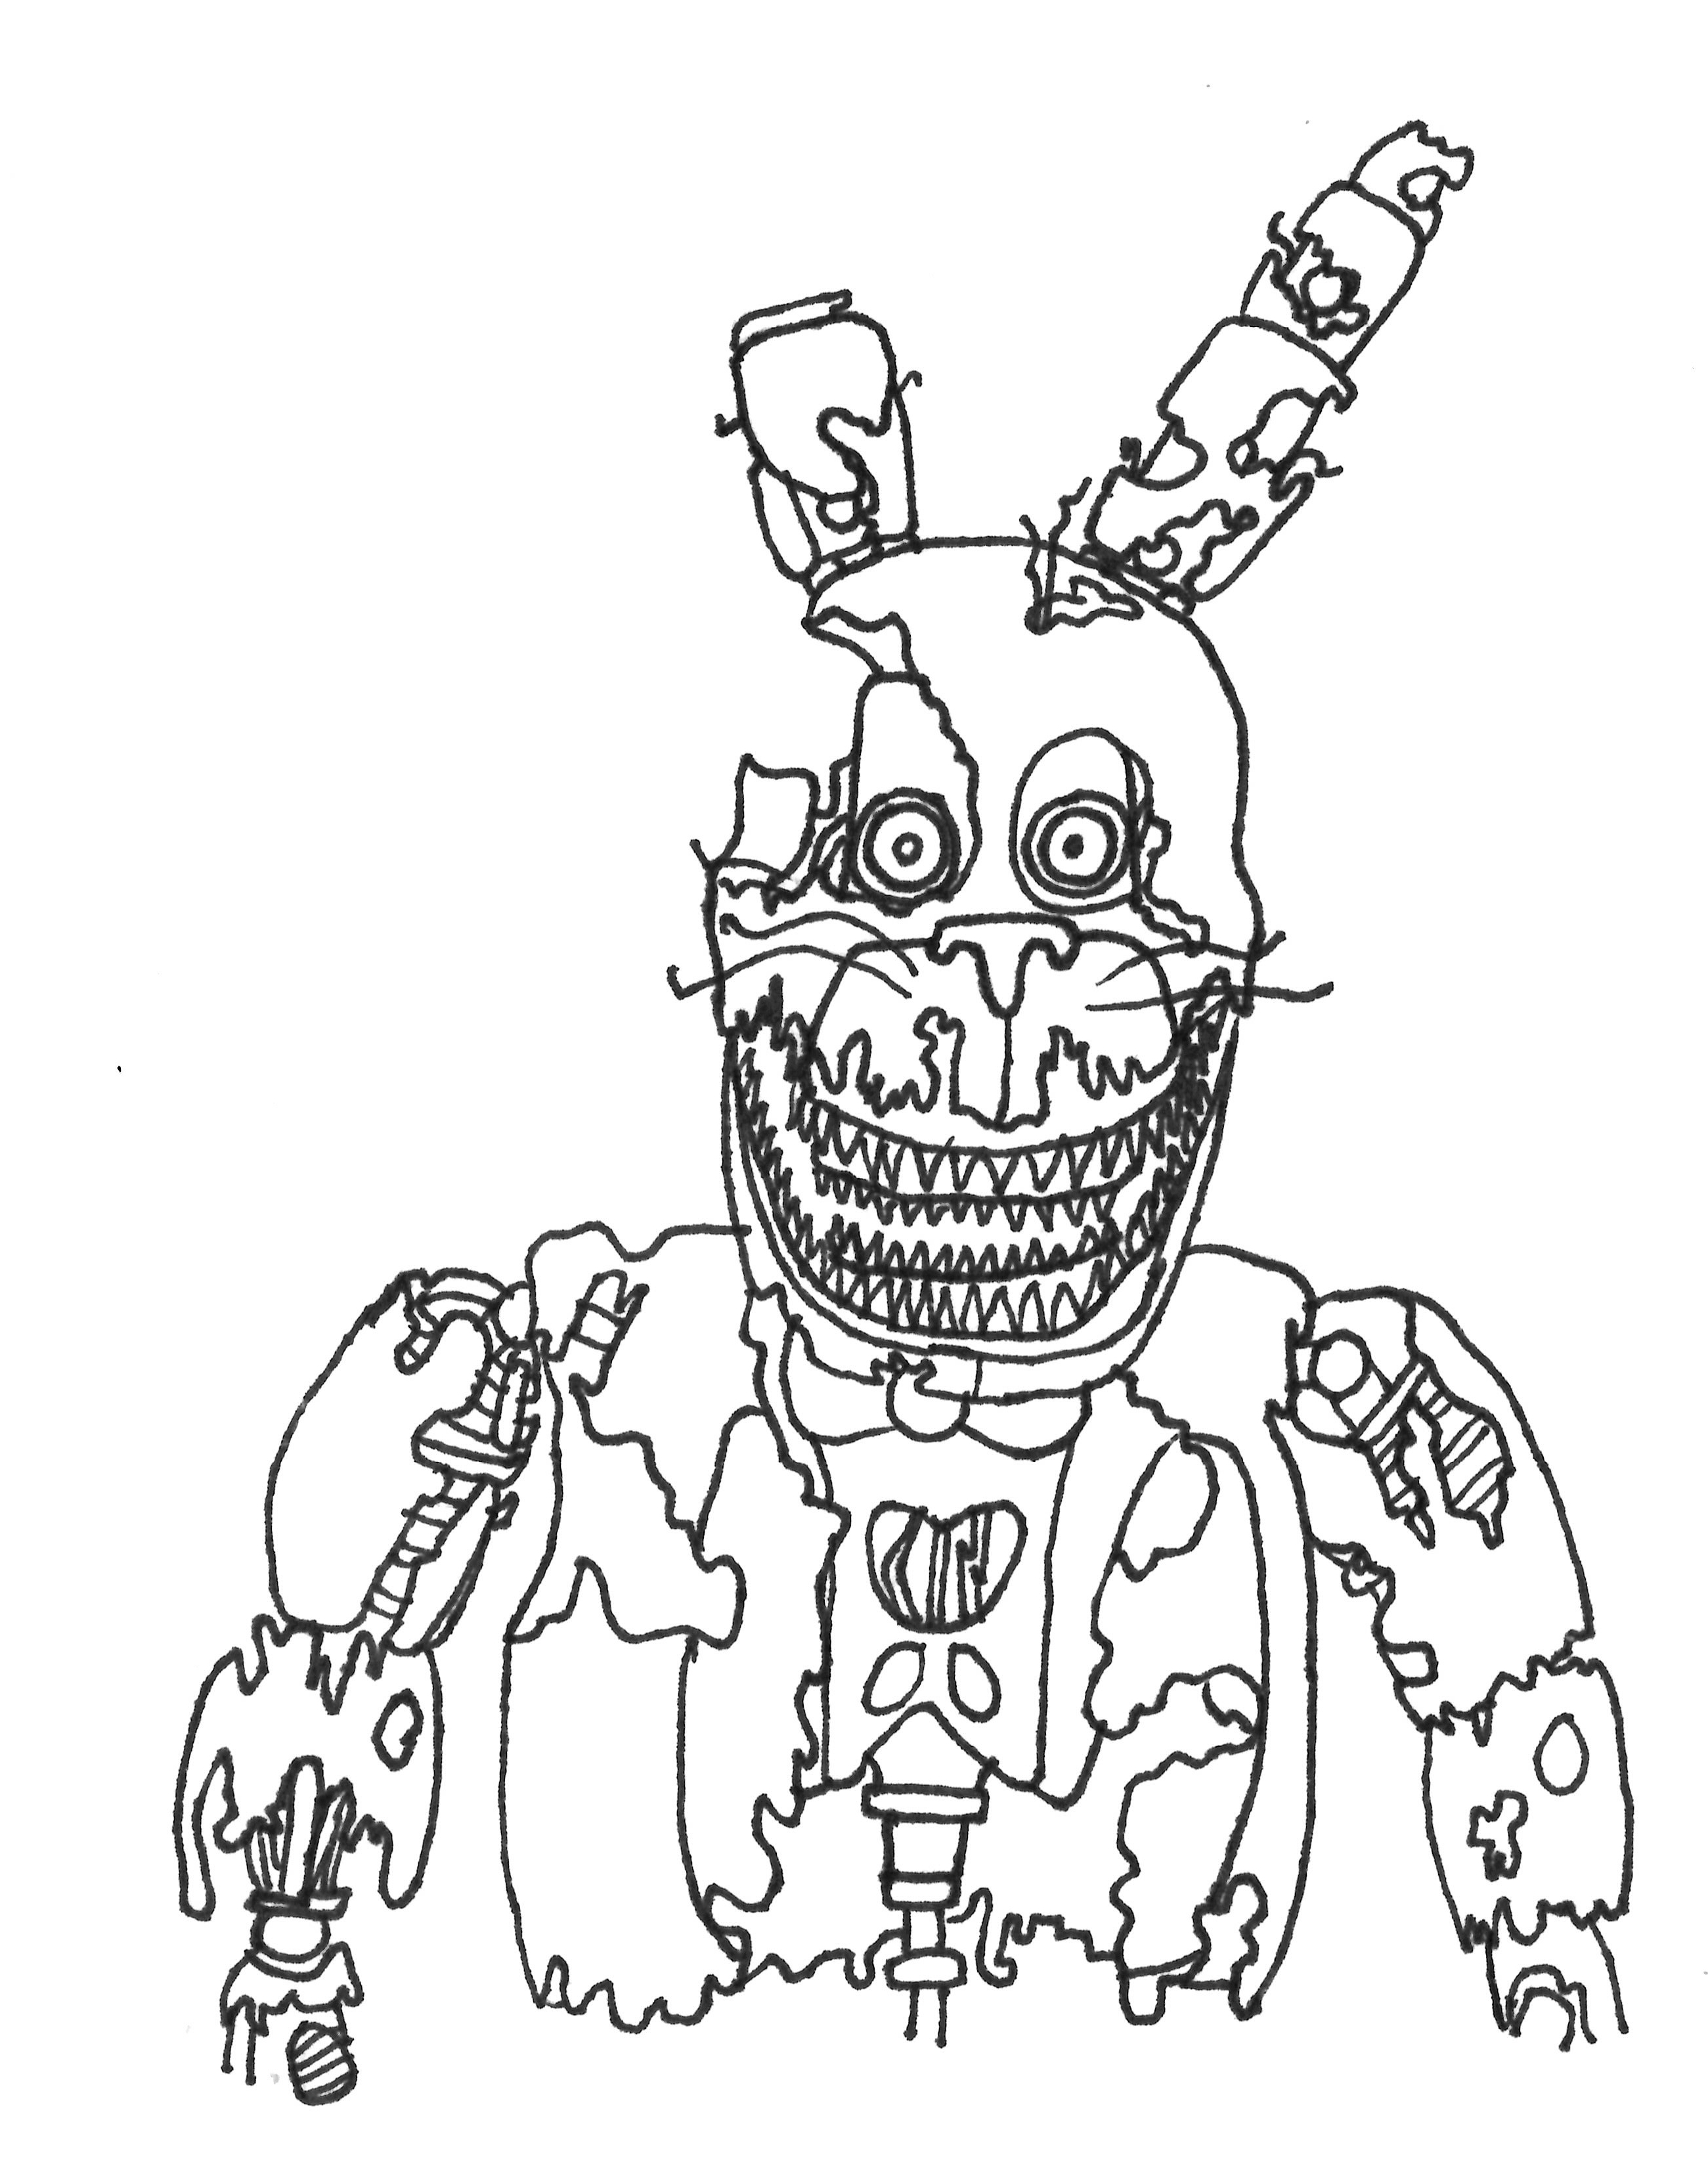 The Best Free Withered Coloring Page Images Download From 31 Free Coloring Pages Of Withered At